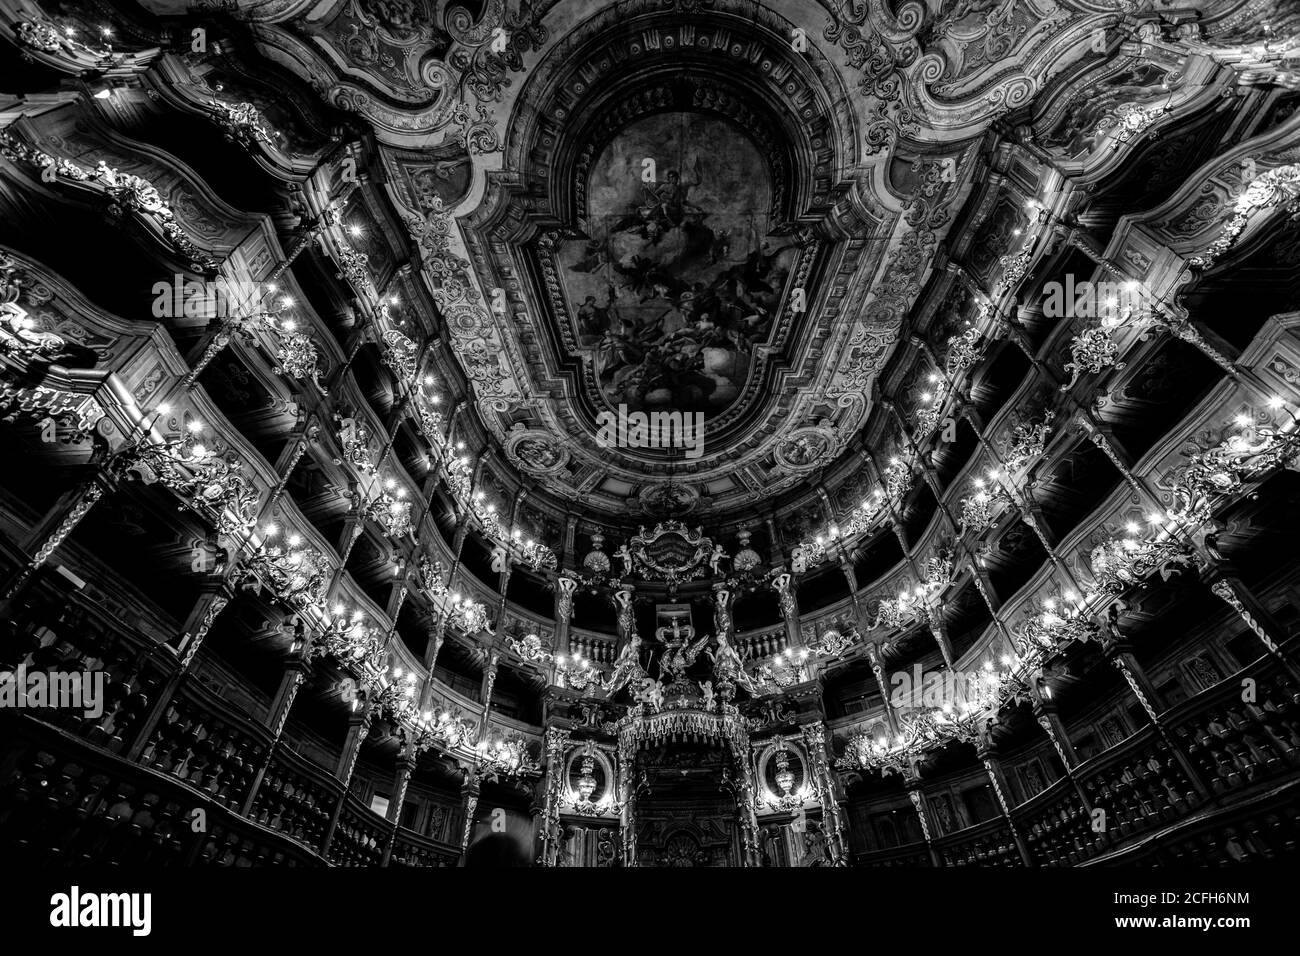 margravial opera house Bayreuth Germany Baroque style Unesco World Heritage listed ornate mid eighteenth century construction Stock Photo